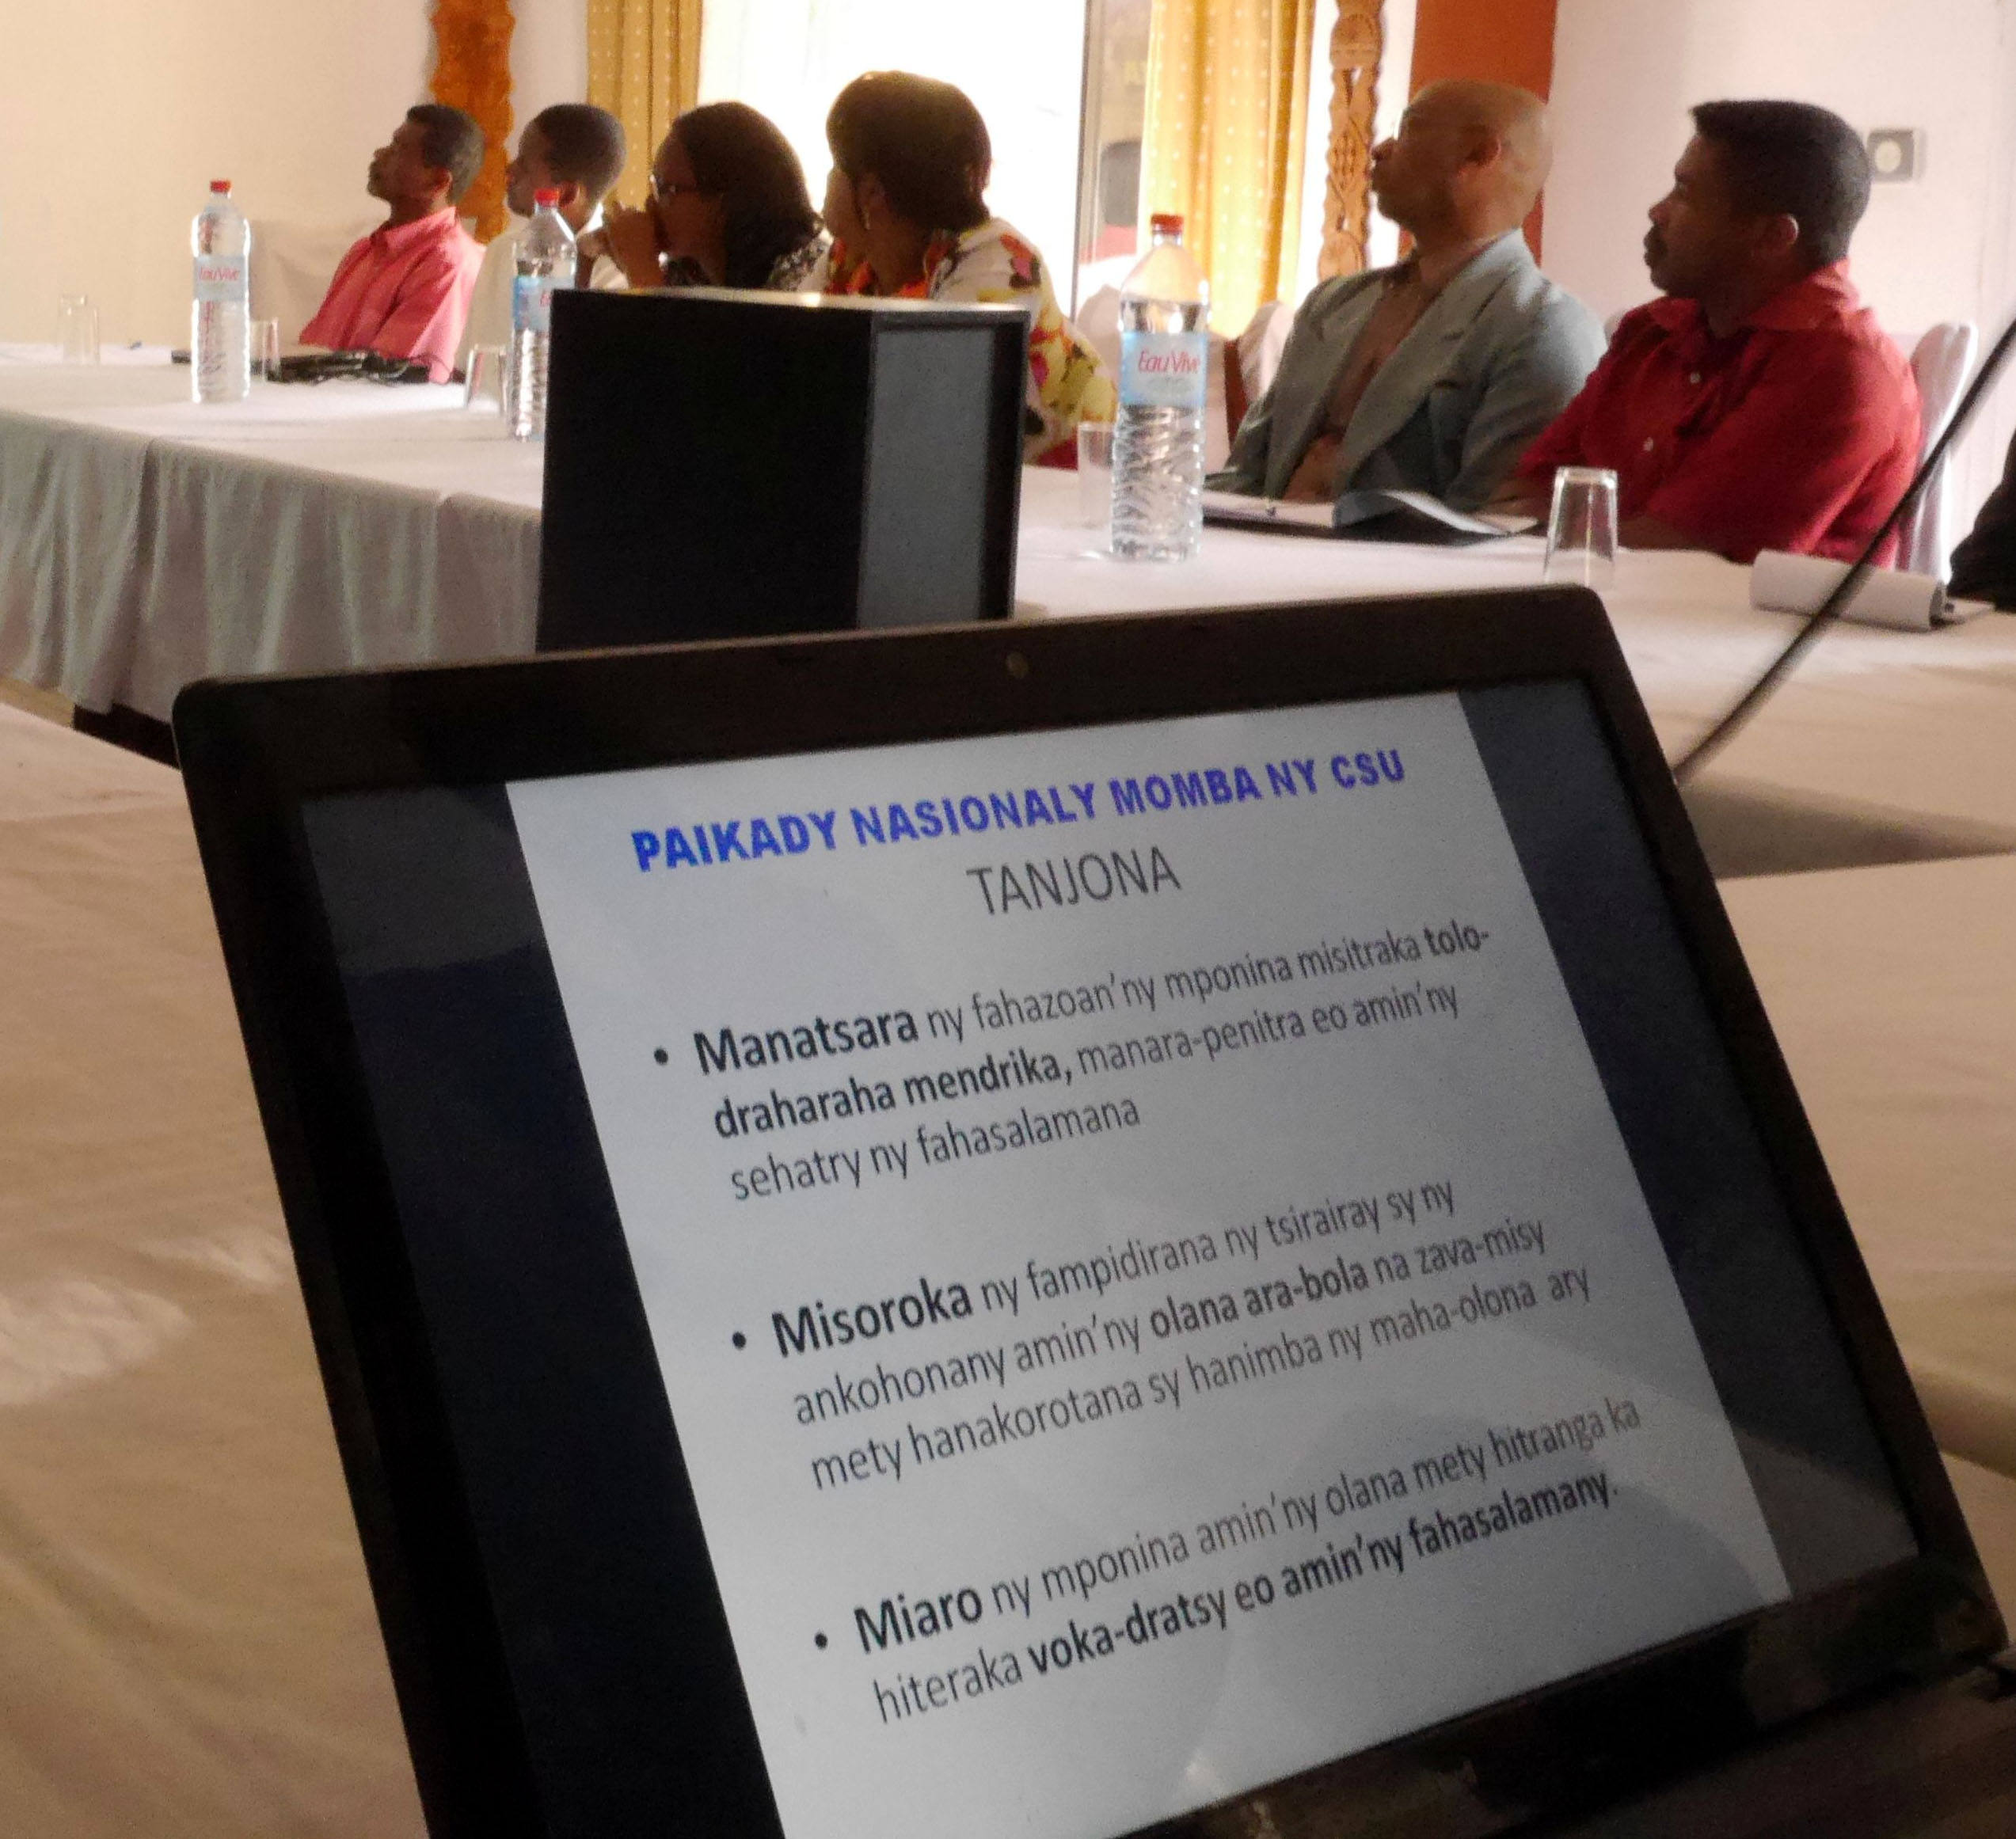 The Ministry of Public Health in Madagascar launched their UHC program with a promotional information tour to the three districts (Vatomandry, Faratsiho, Manandriana) where the pilot implementation is planned